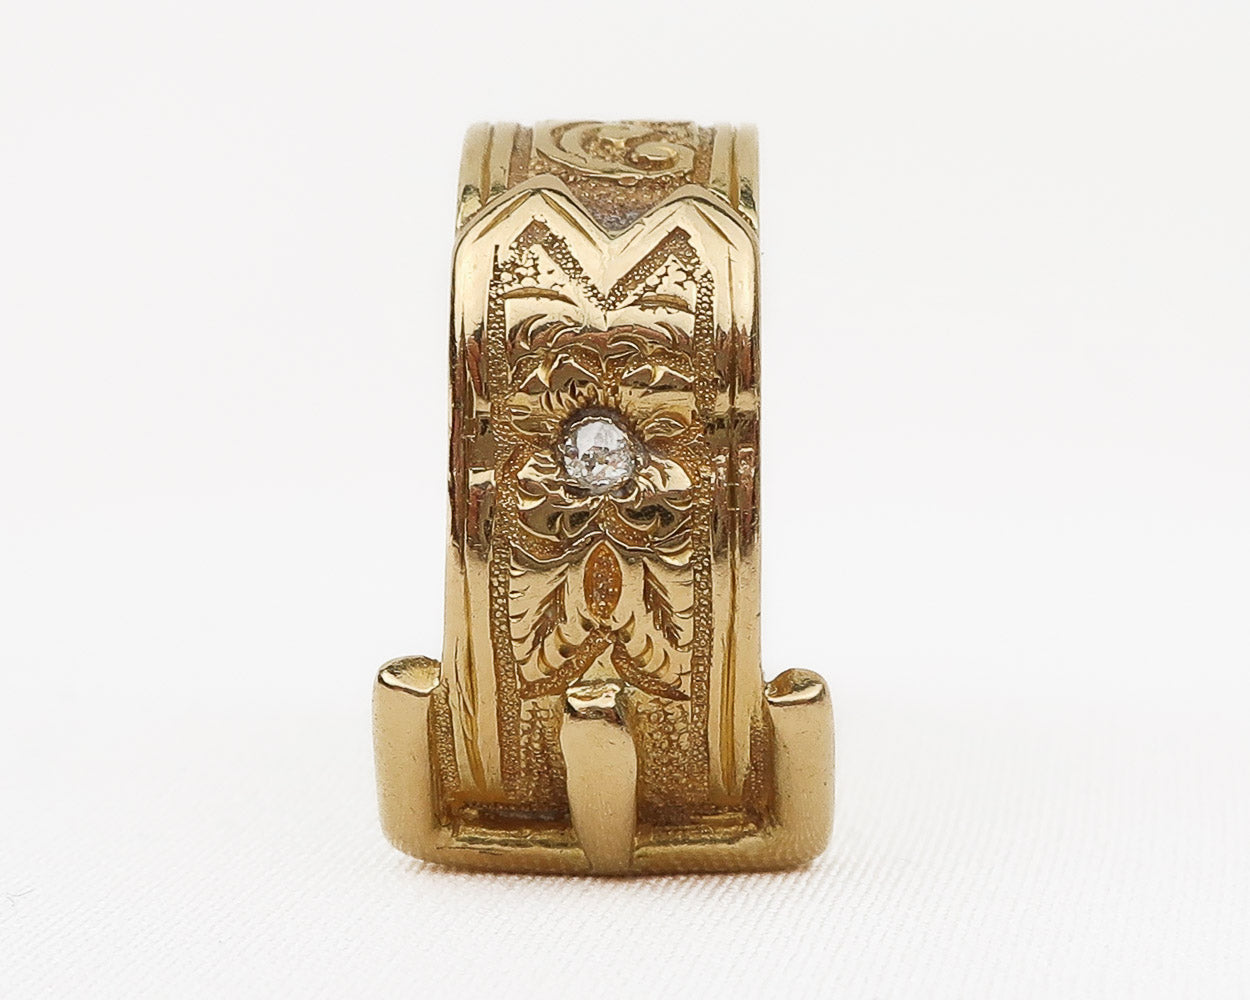 Early-Victorian Buckle Ring with Diamond Accent